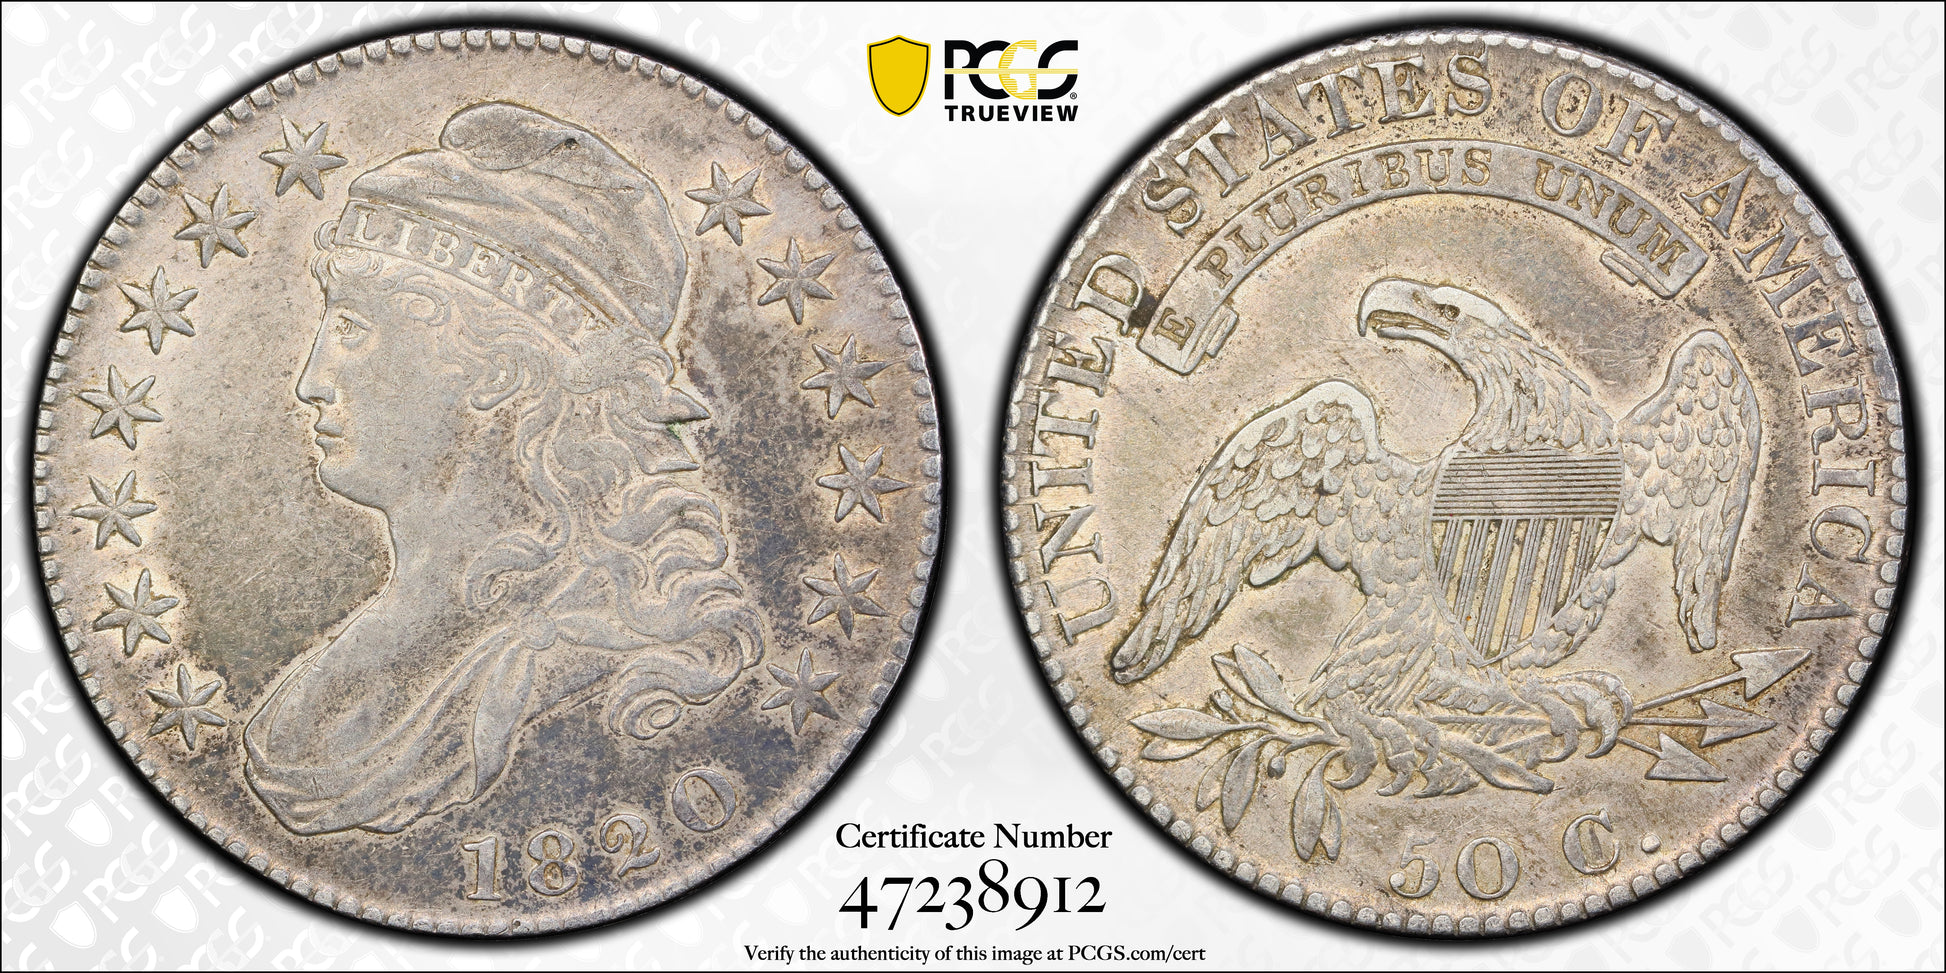 1820 Capped Bust Half Dollar 50C PCGS XF40 - Curl Base 2, Small Date Trueview